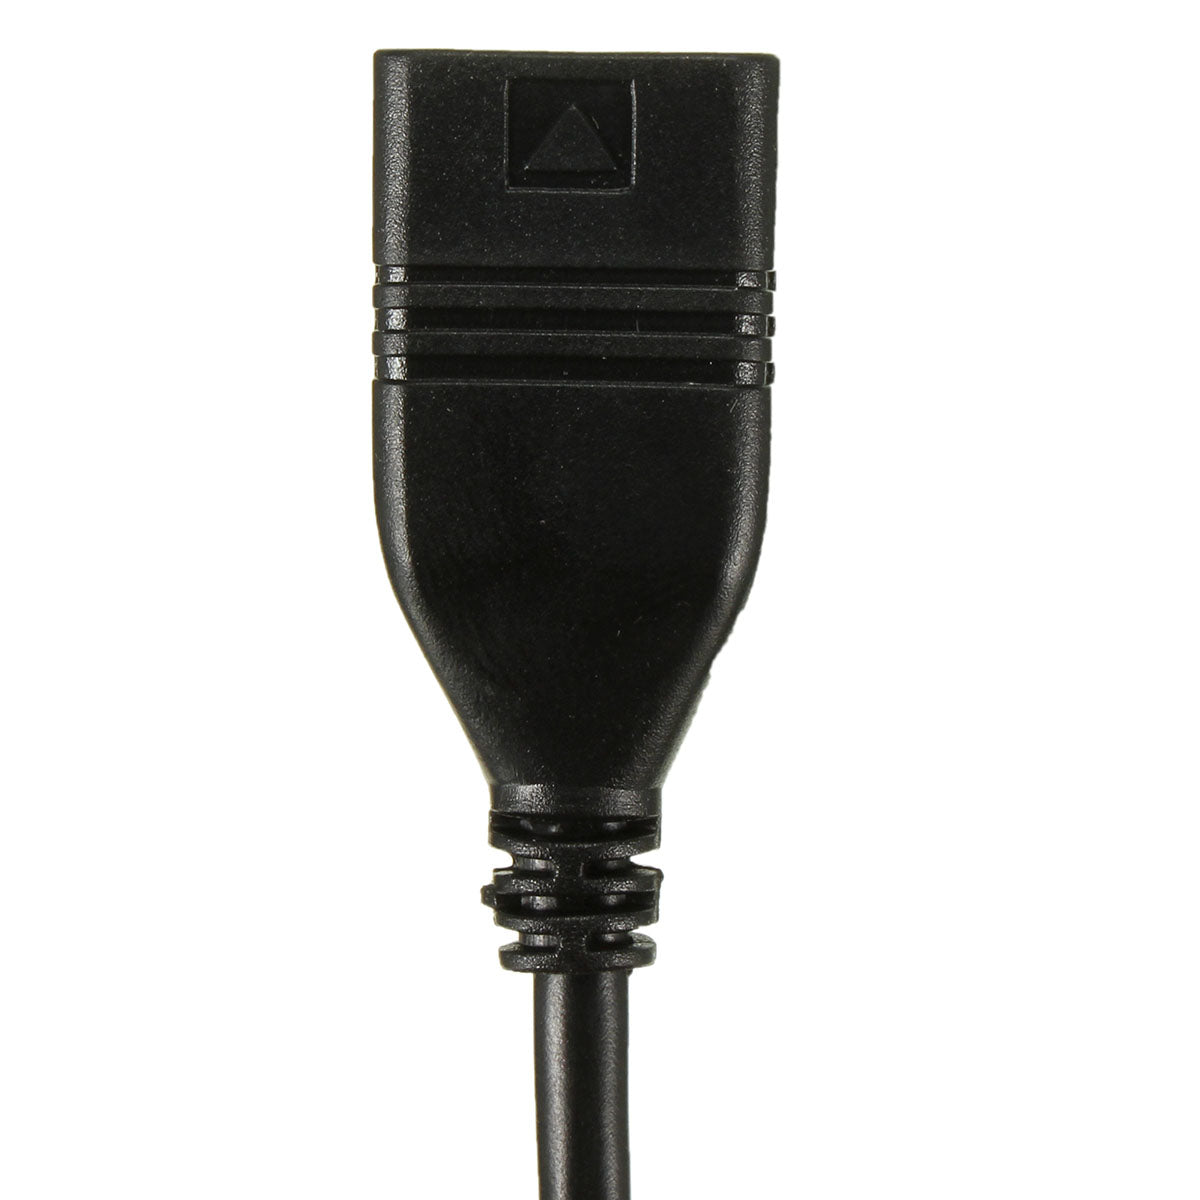 Black Car Audio AMI AUX to USB Cable Data Charging Adapter for Audi A3 A4 A5 A6L Q5 VW Tiguan